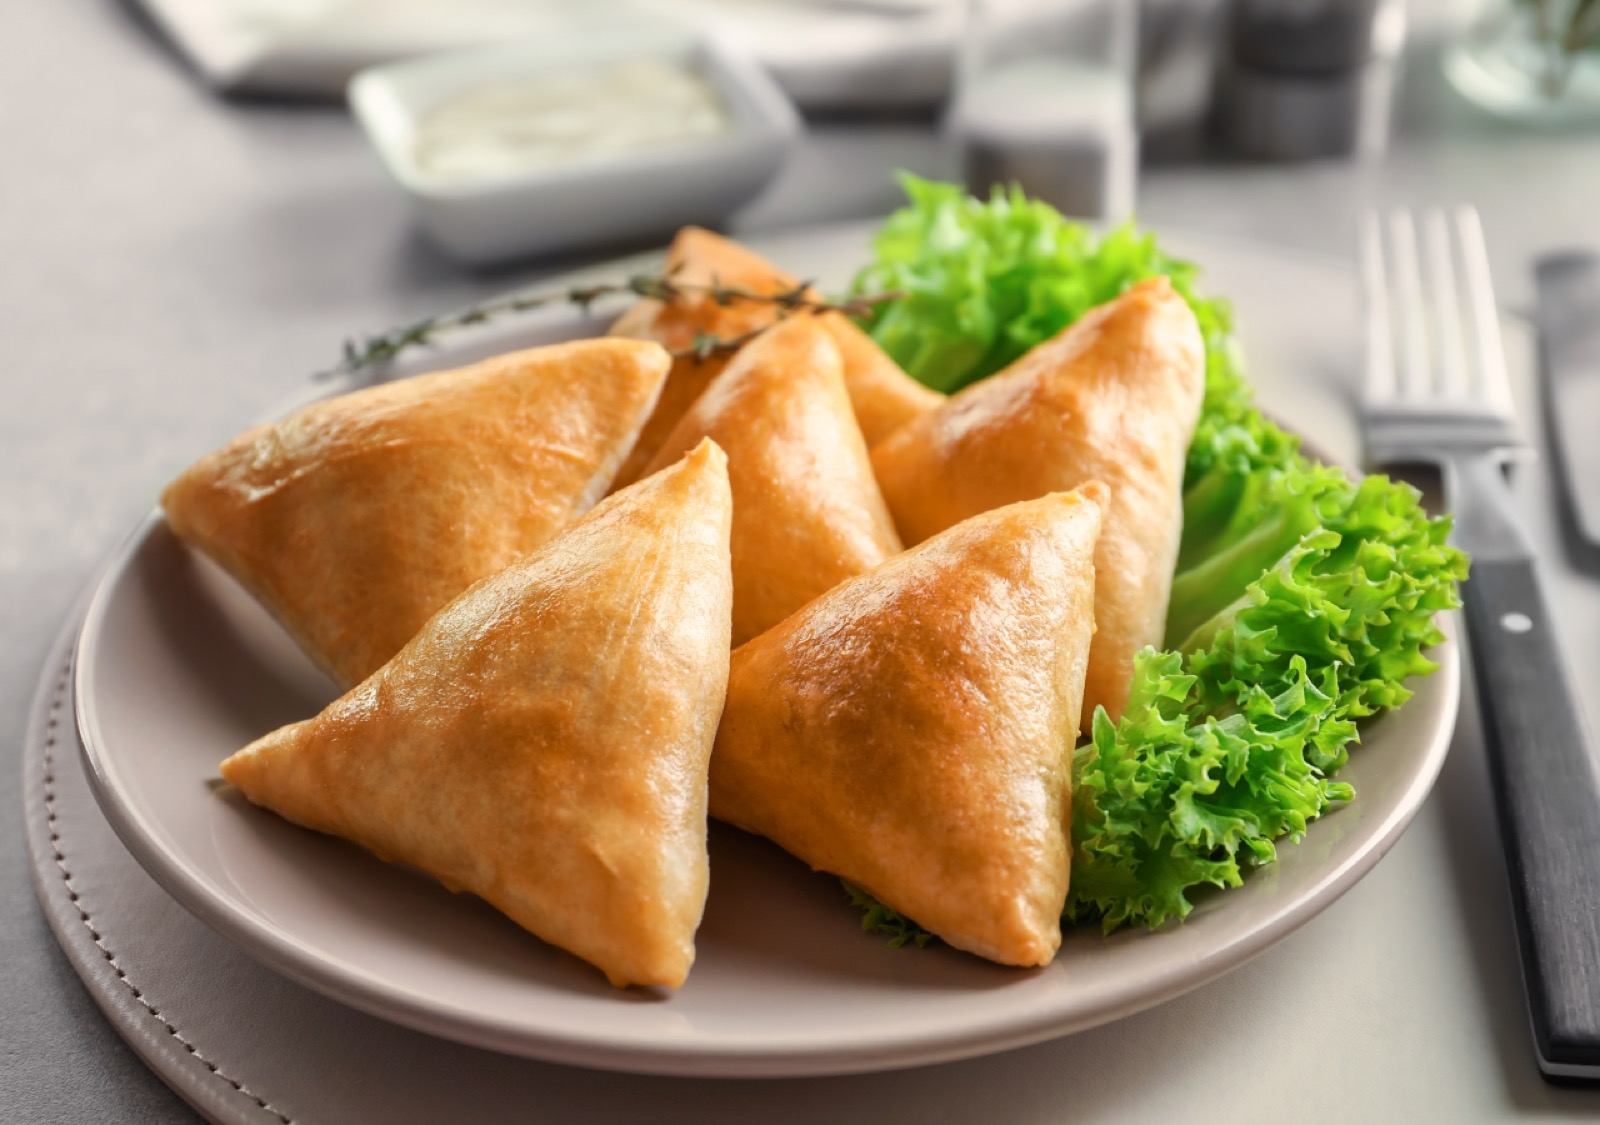 Eat at a Global Food Extravaganza to Determine the Season That Best Represents You Samosas